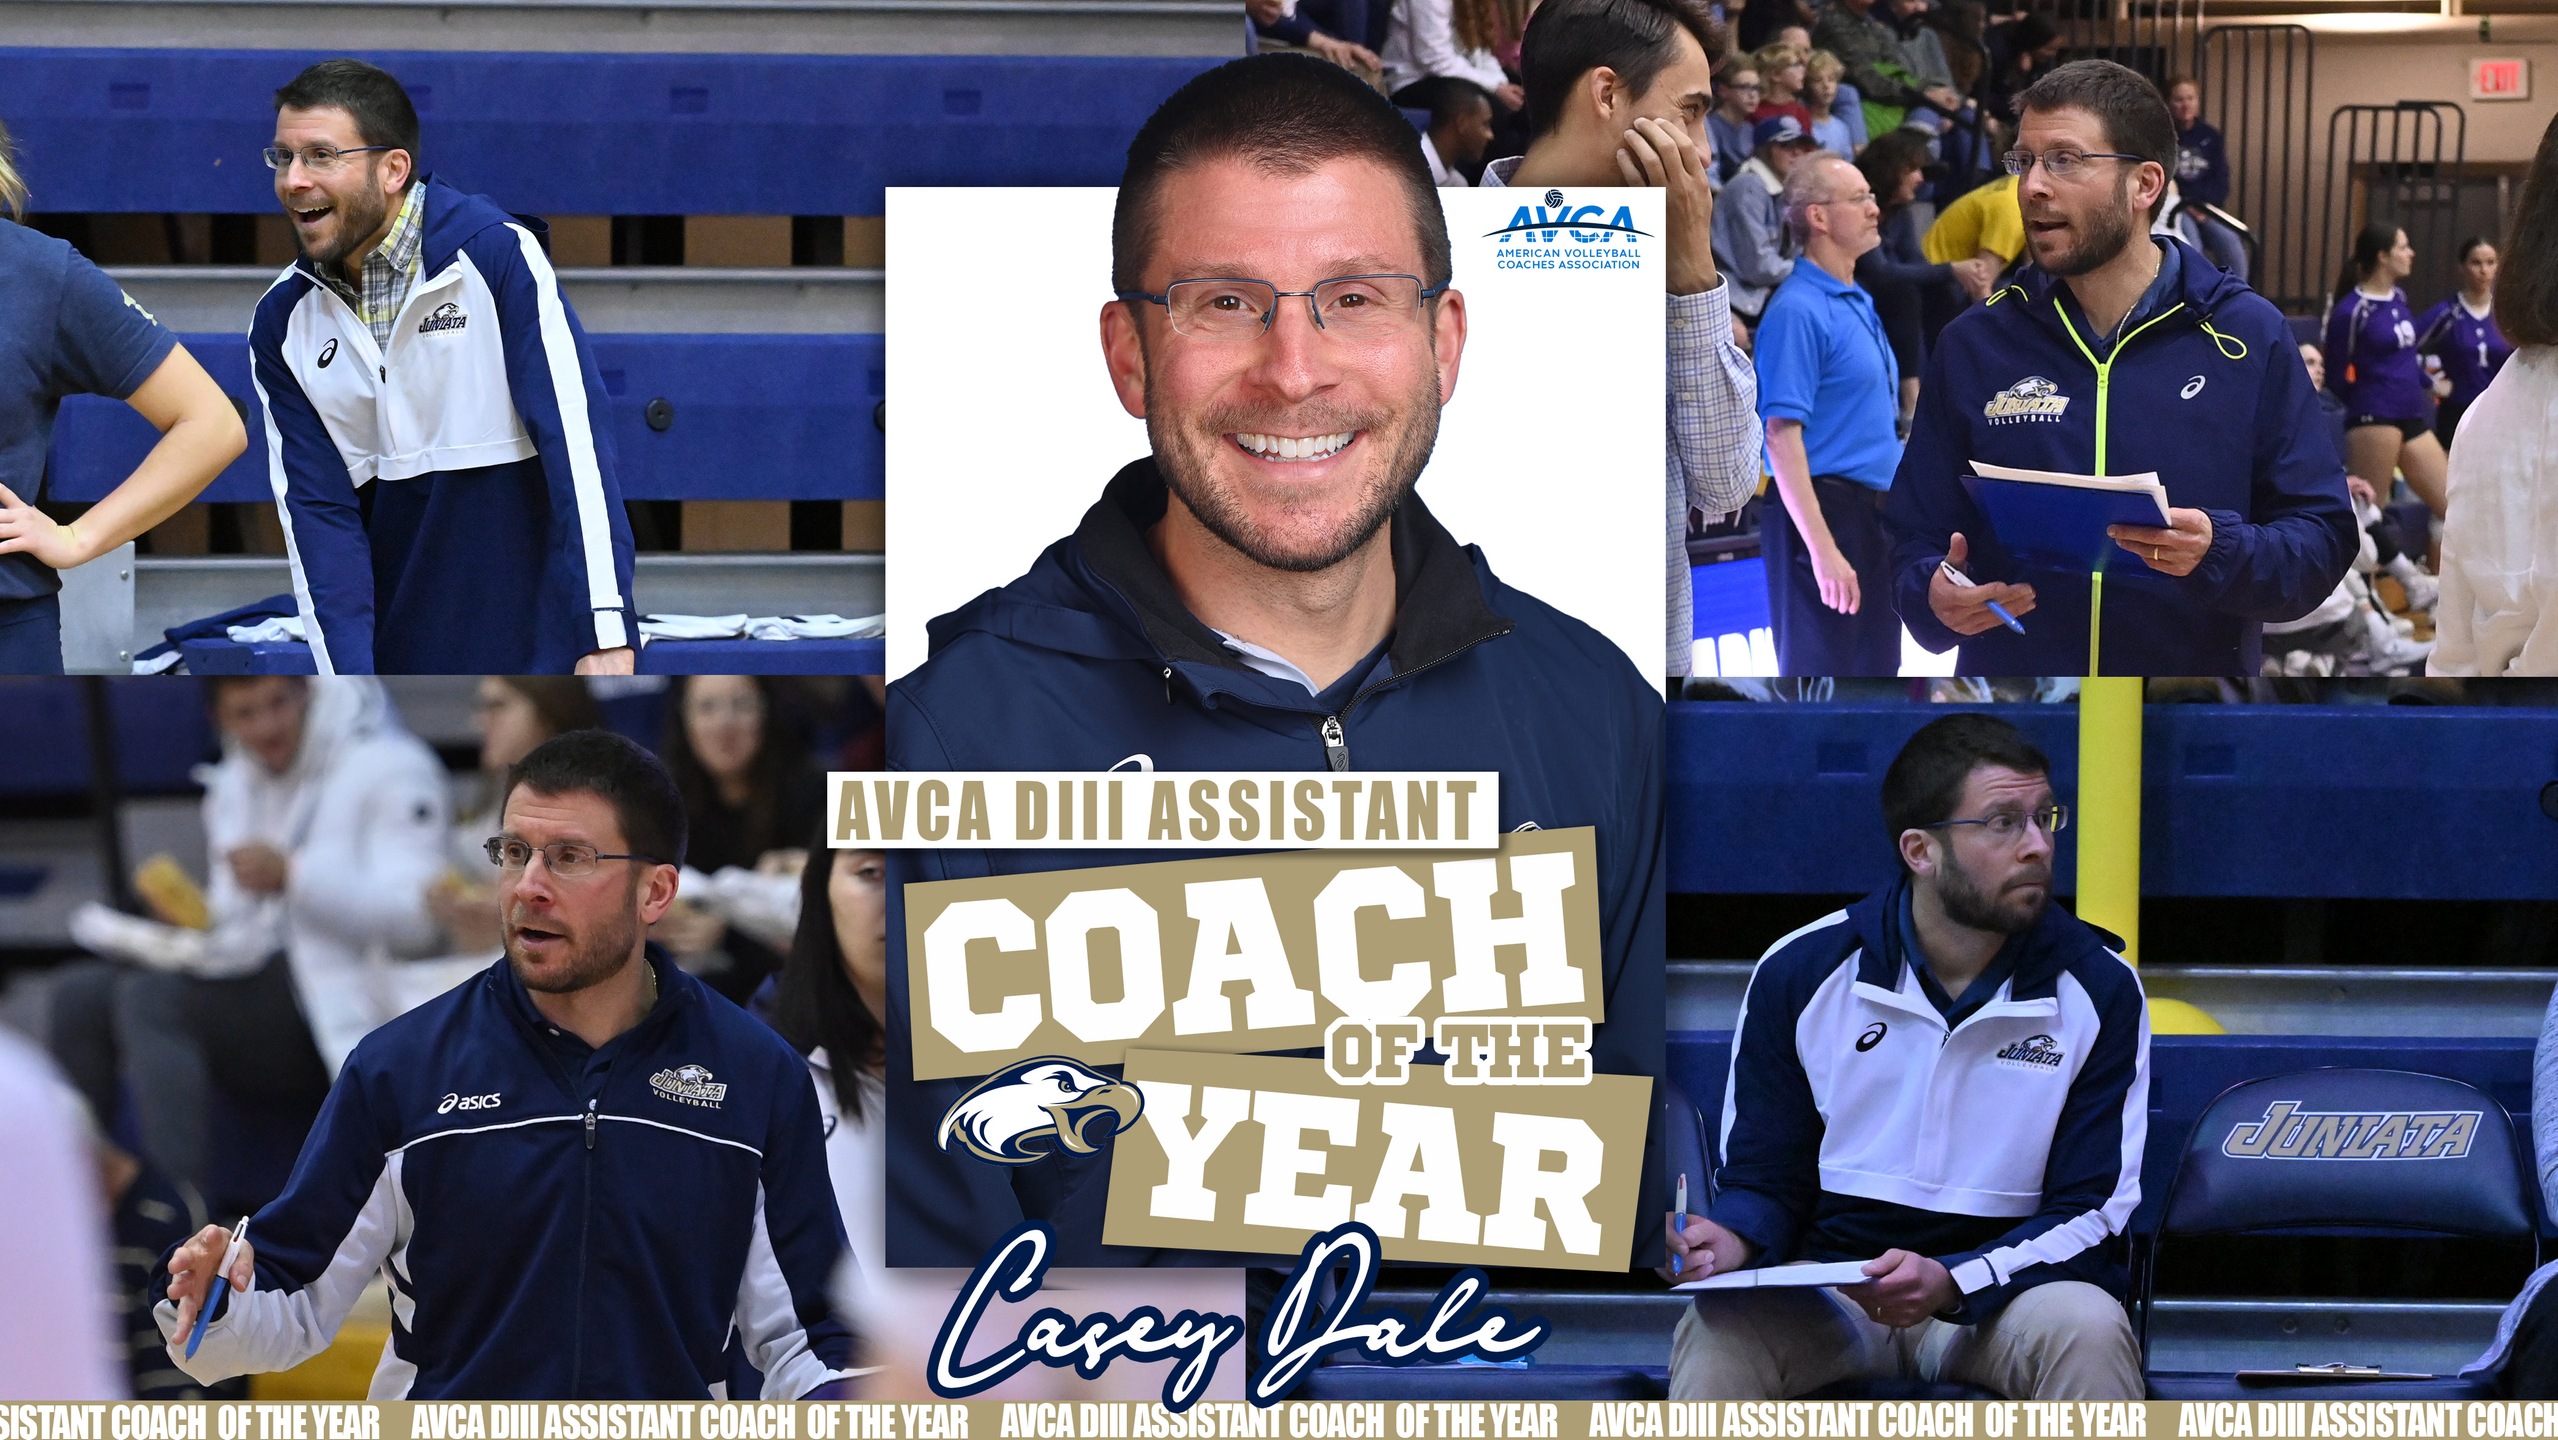 Dale Named AVCA Assistant Coach of the Year